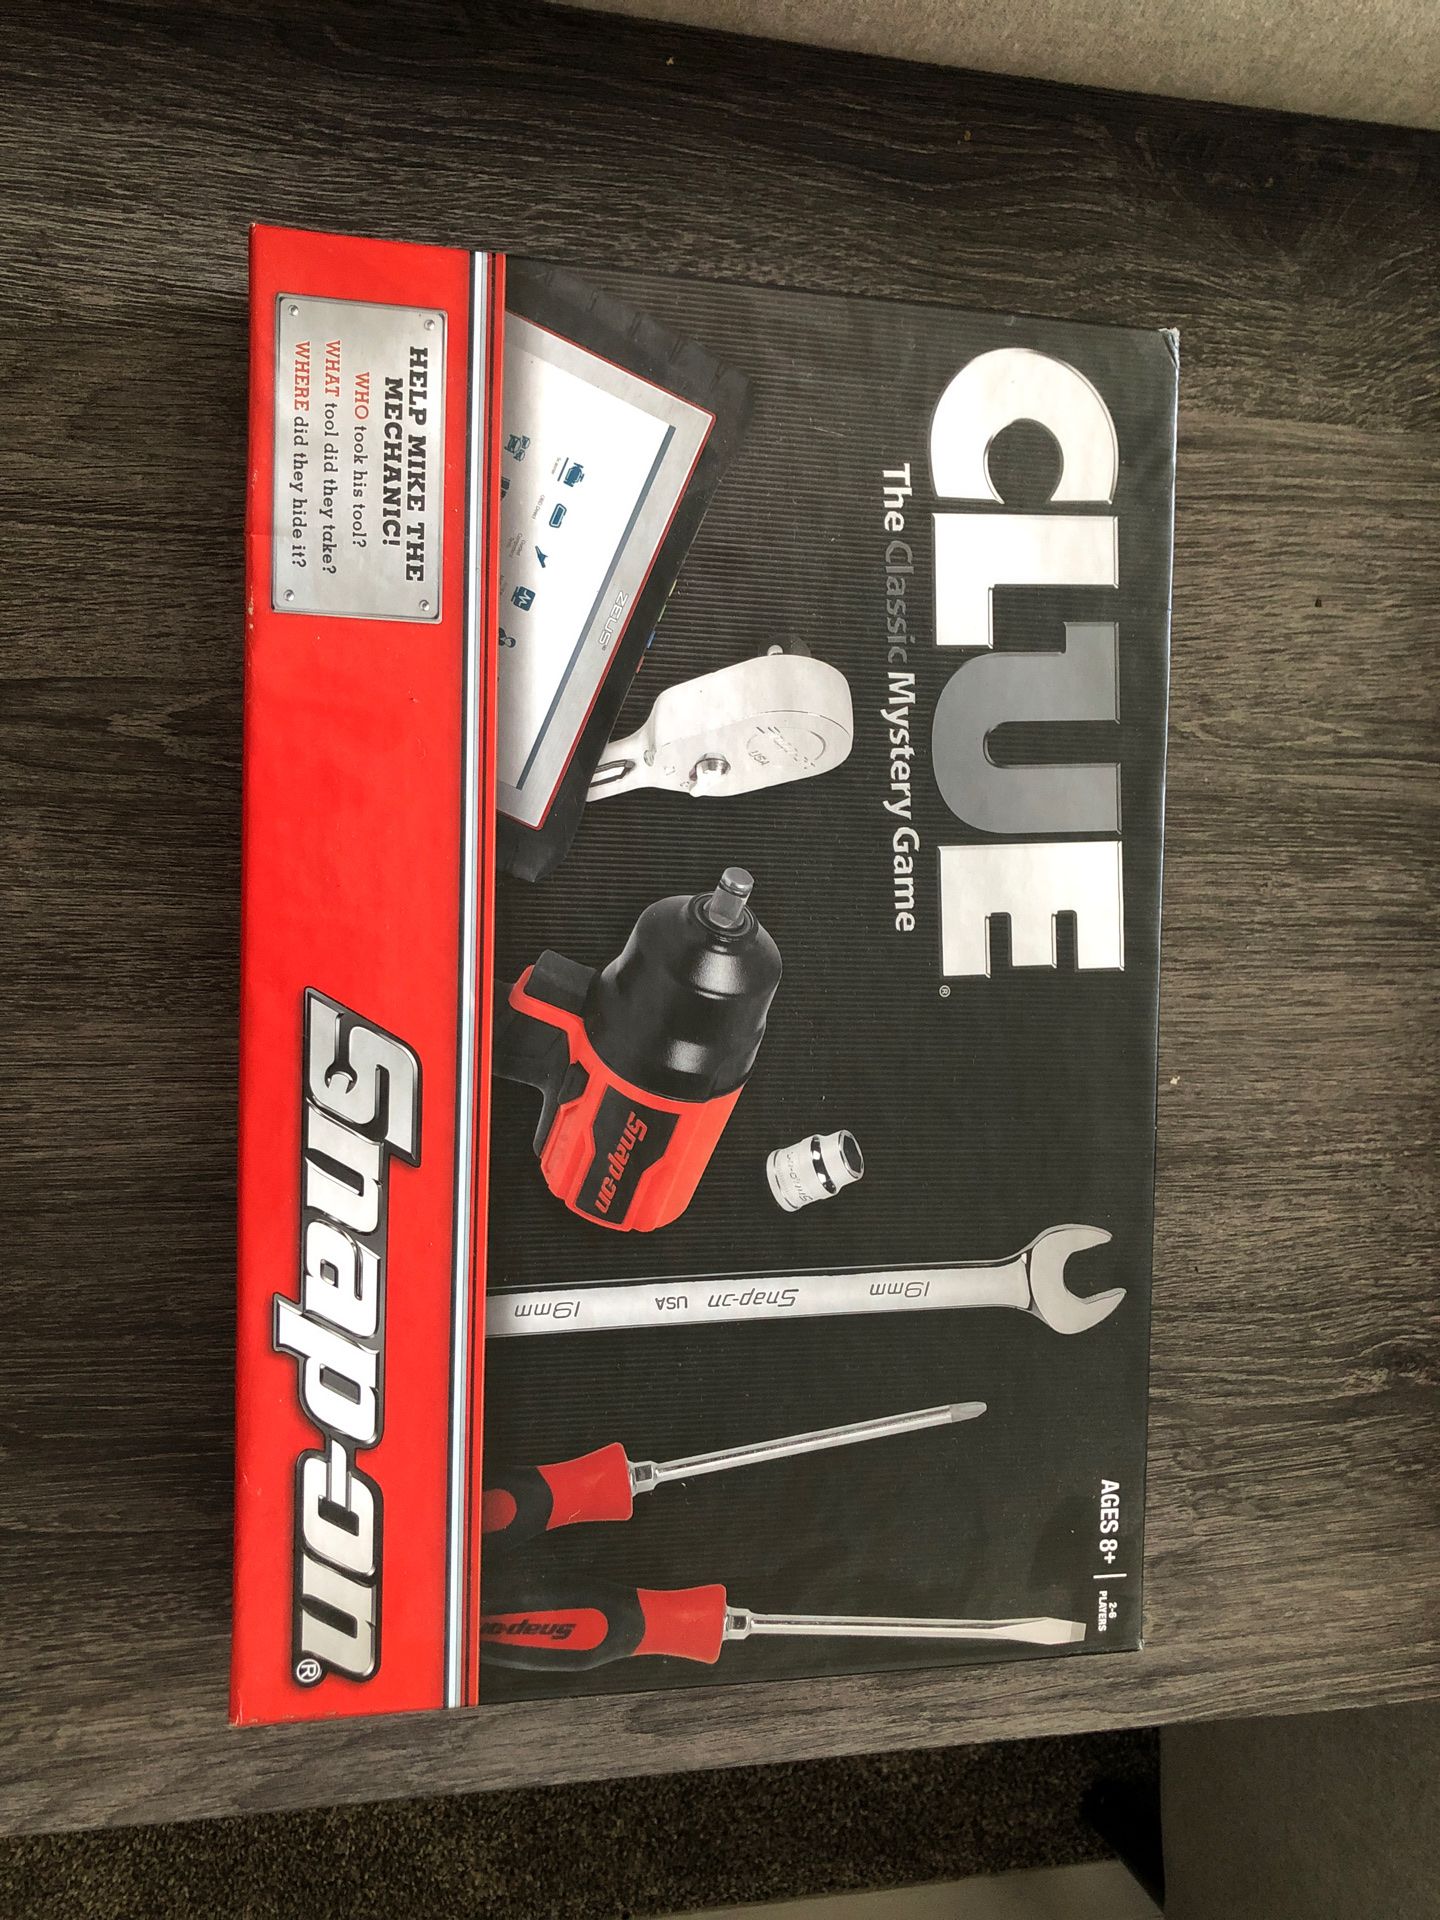 Snap on clue game board